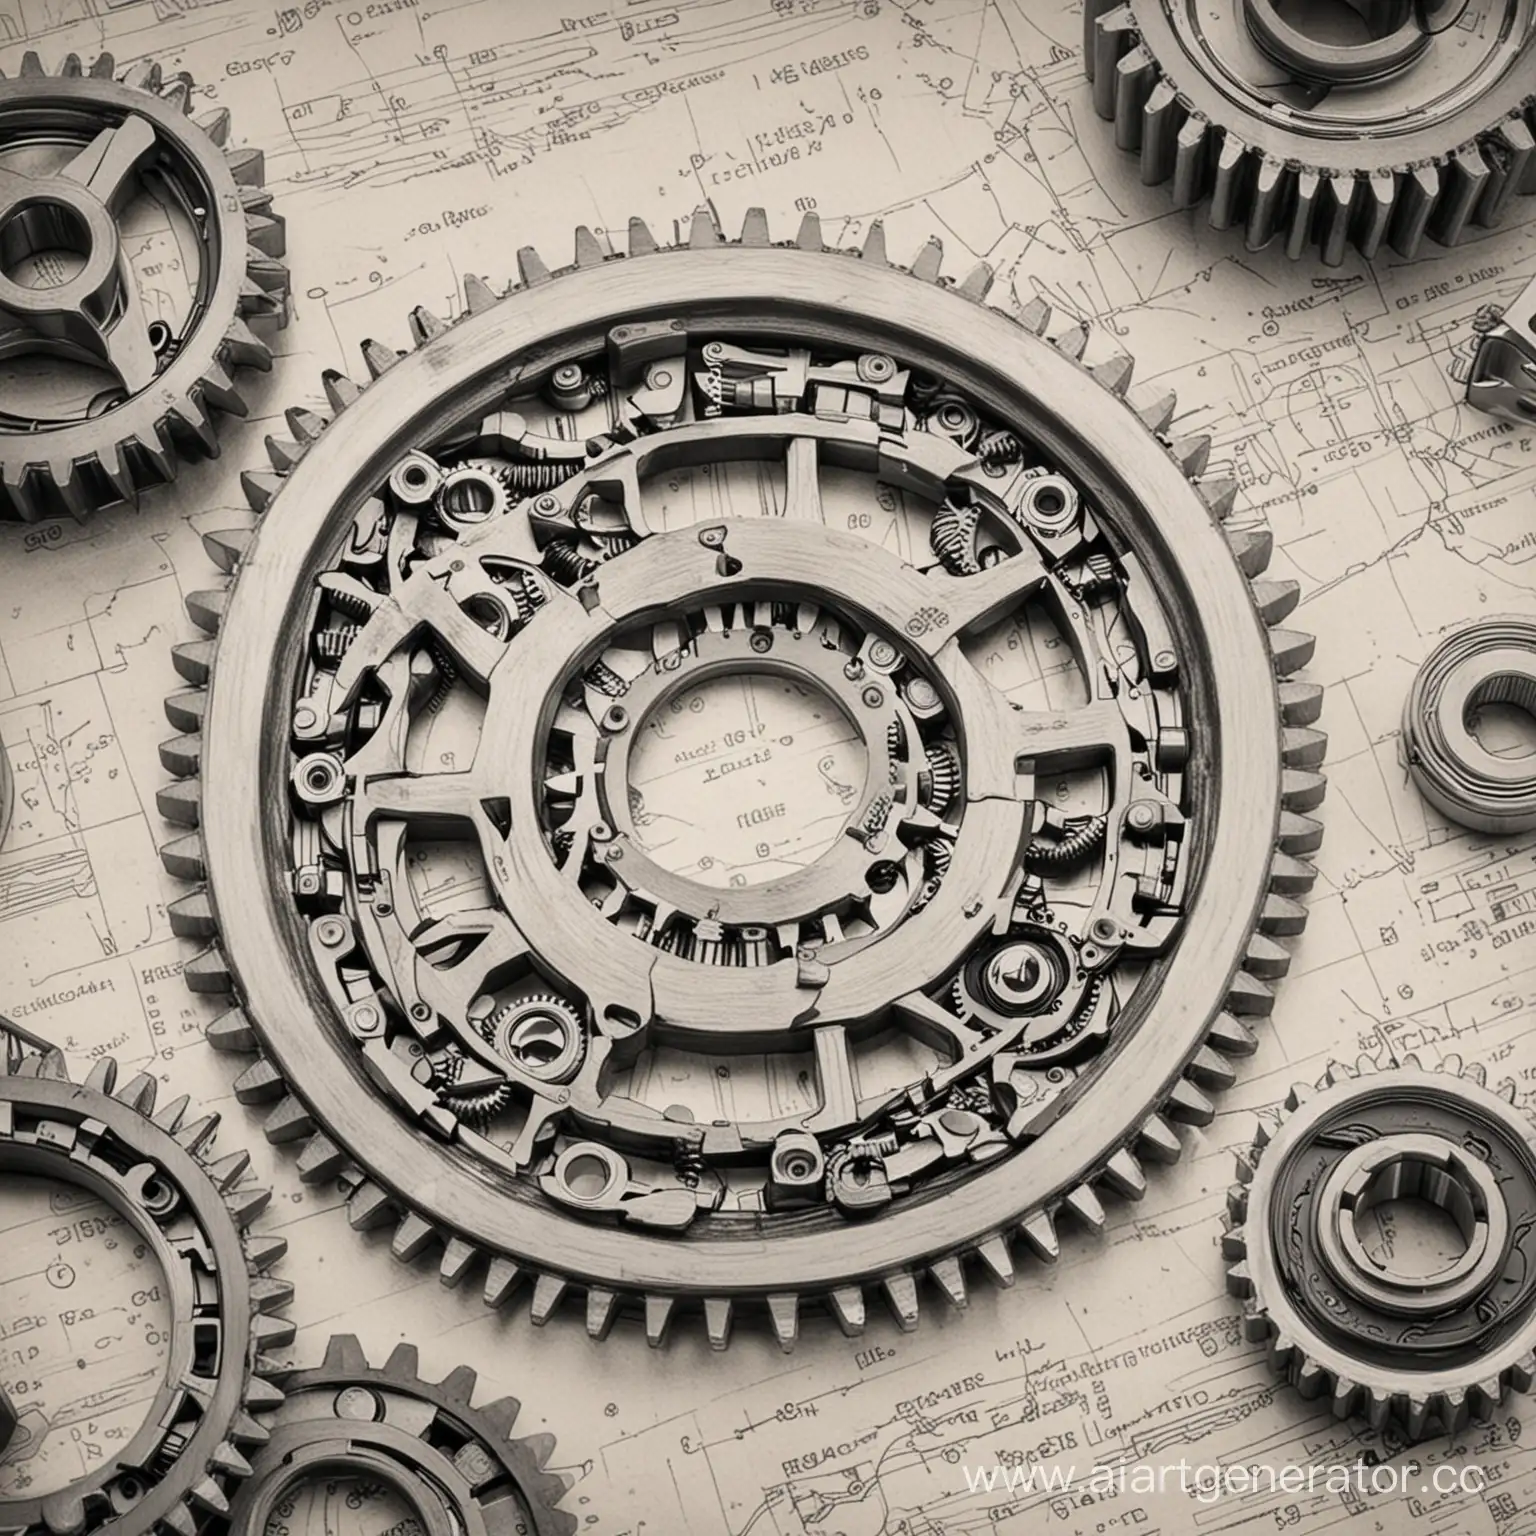 Bearings and gears with drawings and rotors as a company logo